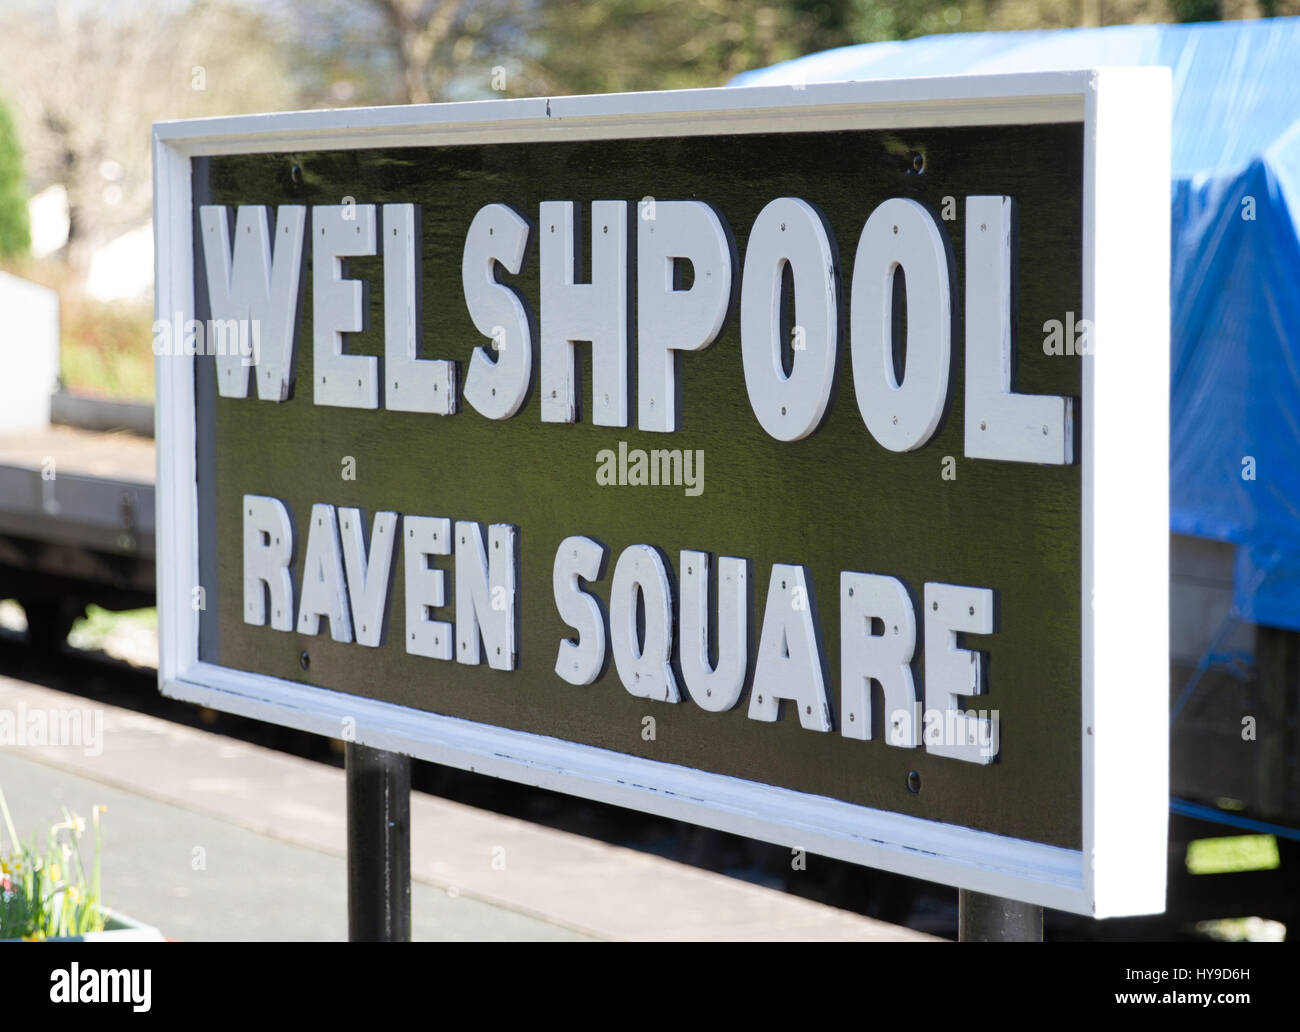 The station sign at Welshpool Raven Square Railway Station on the Welshpool and Llanfair Light Railway, heritage tourist / visitor attraction. Stock Photo